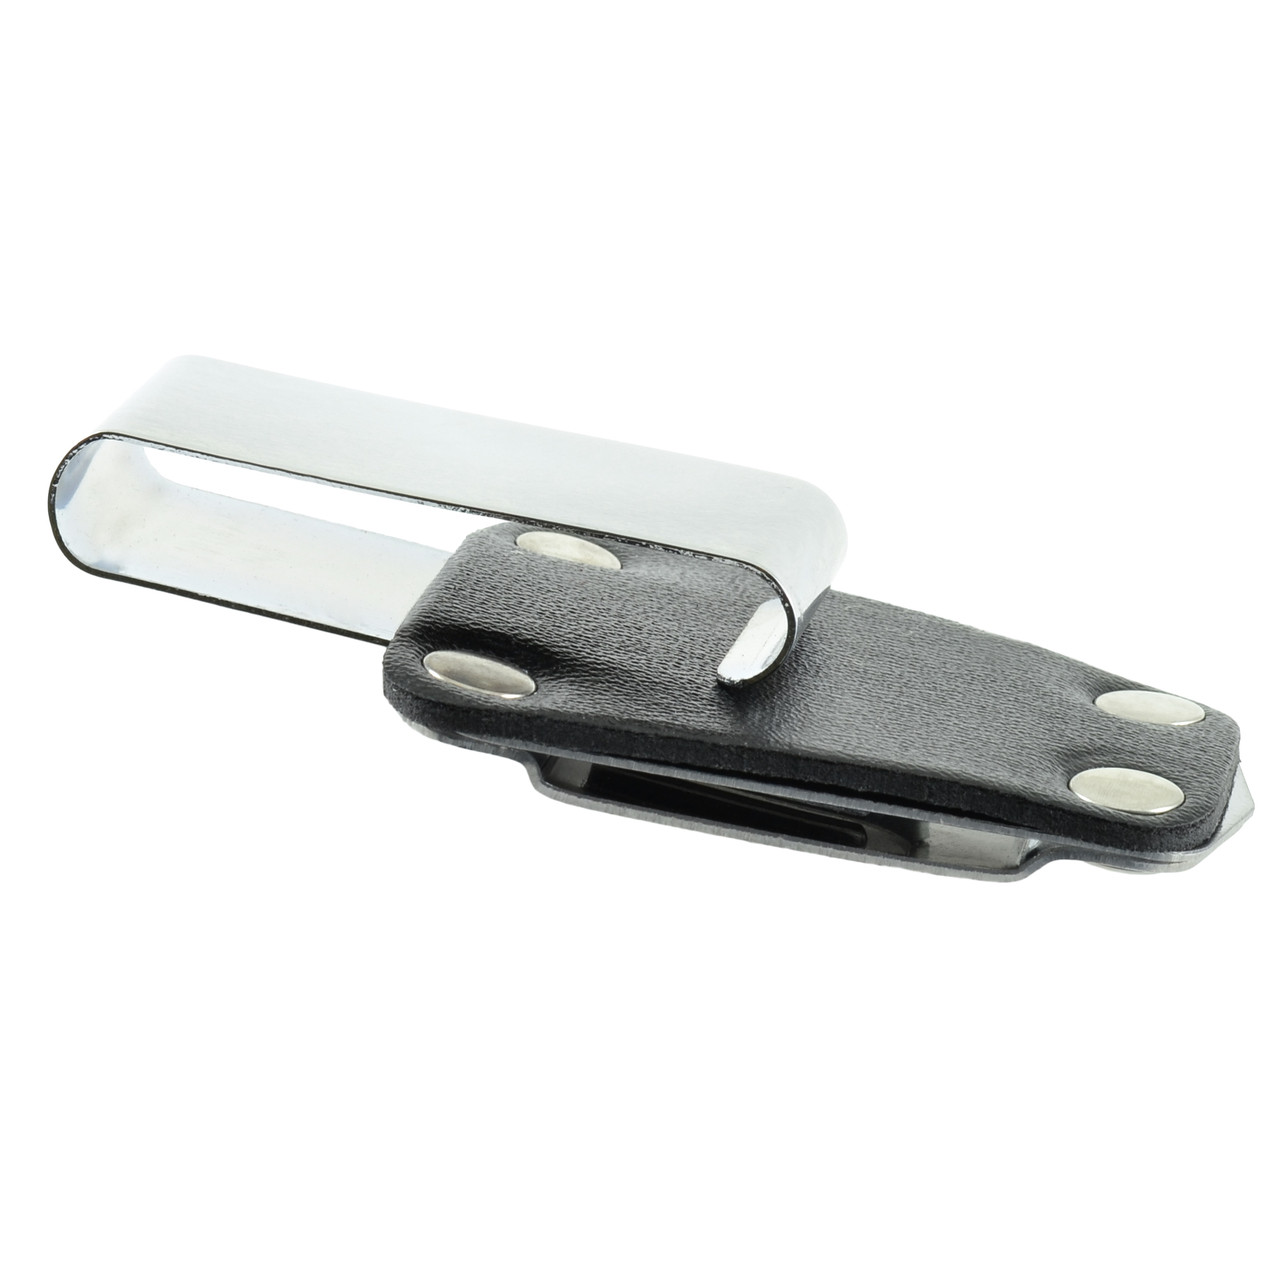 Replacement J Metal Belt Clip Fits 1 3/4 Inches Wide Belts